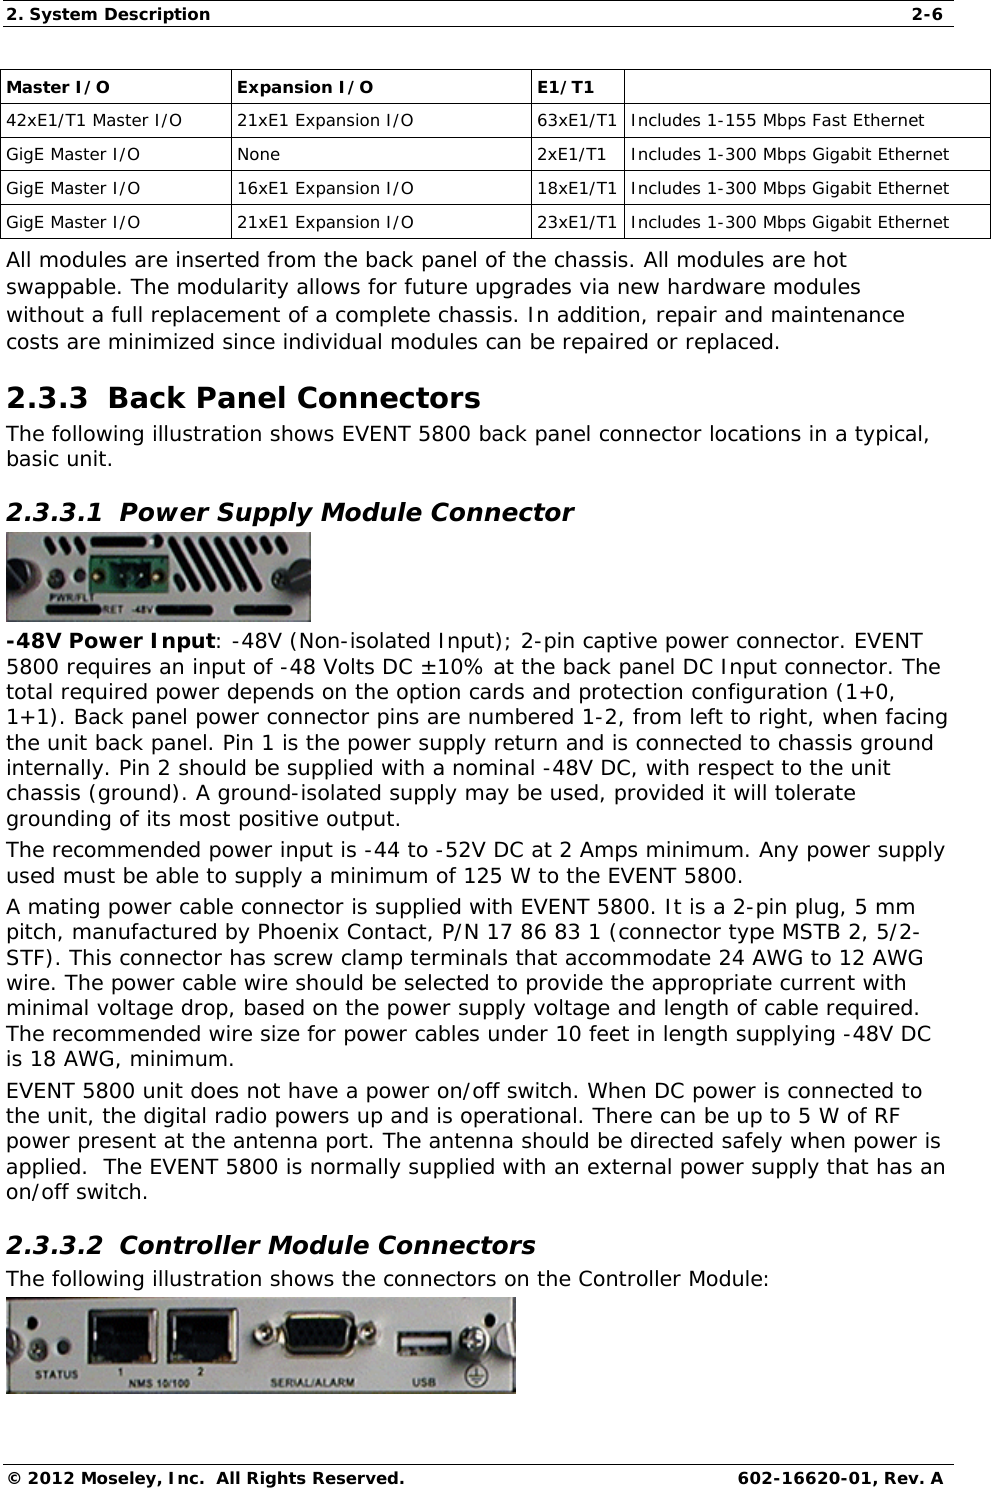 2. System Description  2-6 © 2012 Moseley, Inc.  All Rights Reserved.  602-16620-01, Rev. A Master I/O   Expansion I/O   E1/T1   42xE1/T1 Master I/O  21xE1 Expansion I/O  63xE1/T1 Includes 1-155 Mbps Fast Ethernet  GigE Master I/O  None  2xE1/T1  Includes 1-300 Mbps Gigabit Ethernet  GigE Master I/O  16xE1 Expansion I/O  18xE1/T1 Includes 1-300 Mbps Gigabit Ethernet  GigE Master I/O  21xE1 Expansion I/O  23xE1/T1 Includes 1-300 Mbps Gigabit Ethernet  All modules are inserted from the back panel of the chassis. All modules are hot swappable. The modularity allows for future upgrades via new hardware modules without a full replacement of a complete chassis. In addition, repair and maintenance costs are minimized since individual modules can be repaired or replaced.  2.3.3  Back Panel Connectors The following illustration shows EVENT 5800 back panel connector locations in a typical, basic unit. 2.3.3.1  Power Supply Module Connector  -48V Power Input: -48V (Non-isolated Input); 2-pin captive power connector. EVENT 5800 requires an input of -48 Volts DC ±10% at the back panel DC Input connector. The total required power depends on the option cards and protection configuration (1+0, 1+1). Back panel power connector pins are numbered 1-2, from left to right, when facing the unit back panel. Pin 1 is the power supply return and is connected to chassis ground internally. Pin 2 should be supplied with a nominal -48V DC, with respect to the unit chassis (ground). A ground-isolated supply may be used, provided it will tolerate grounding of its most positive output. The recommended power input is -44 to -52V DC at 2 Amps minimum. Any power supply used must be able to supply a minimum of 125 W to the EVENT 5800. A mating power cable connector is supplied with EVENT 5800. It is a 2-pin plug, 5 mm pitch, manufactured by Phoenix Contact, P/N 17 86 83 1 (connector type MSTB 2, 5/2-STF). This connector has screw clamp terminals that accommodate 24 AWG to 12 AWG wire. The power cable wire should be selected to provide the appropriate current with minimal voltage drop, based on the power supply voltage and length of cable required. The recommended wire size for power cables under 10 feet in length supplying -48V DC is 18 AWG, minimum. EVENT 5800 unit does not have a power on/off switch. When DC power is connected to the unit, the digital radio powers up and is operational. There can be up to 5 W of RF power present at the antenna port. The antenna should be directed safely when power is applied.  The EVENT 5800 is normally supplied with an external power supply that has an on/off switch. 2.3.3.2  Controller Module Connectors The following illustration shows the connectors on the Controller Module:  